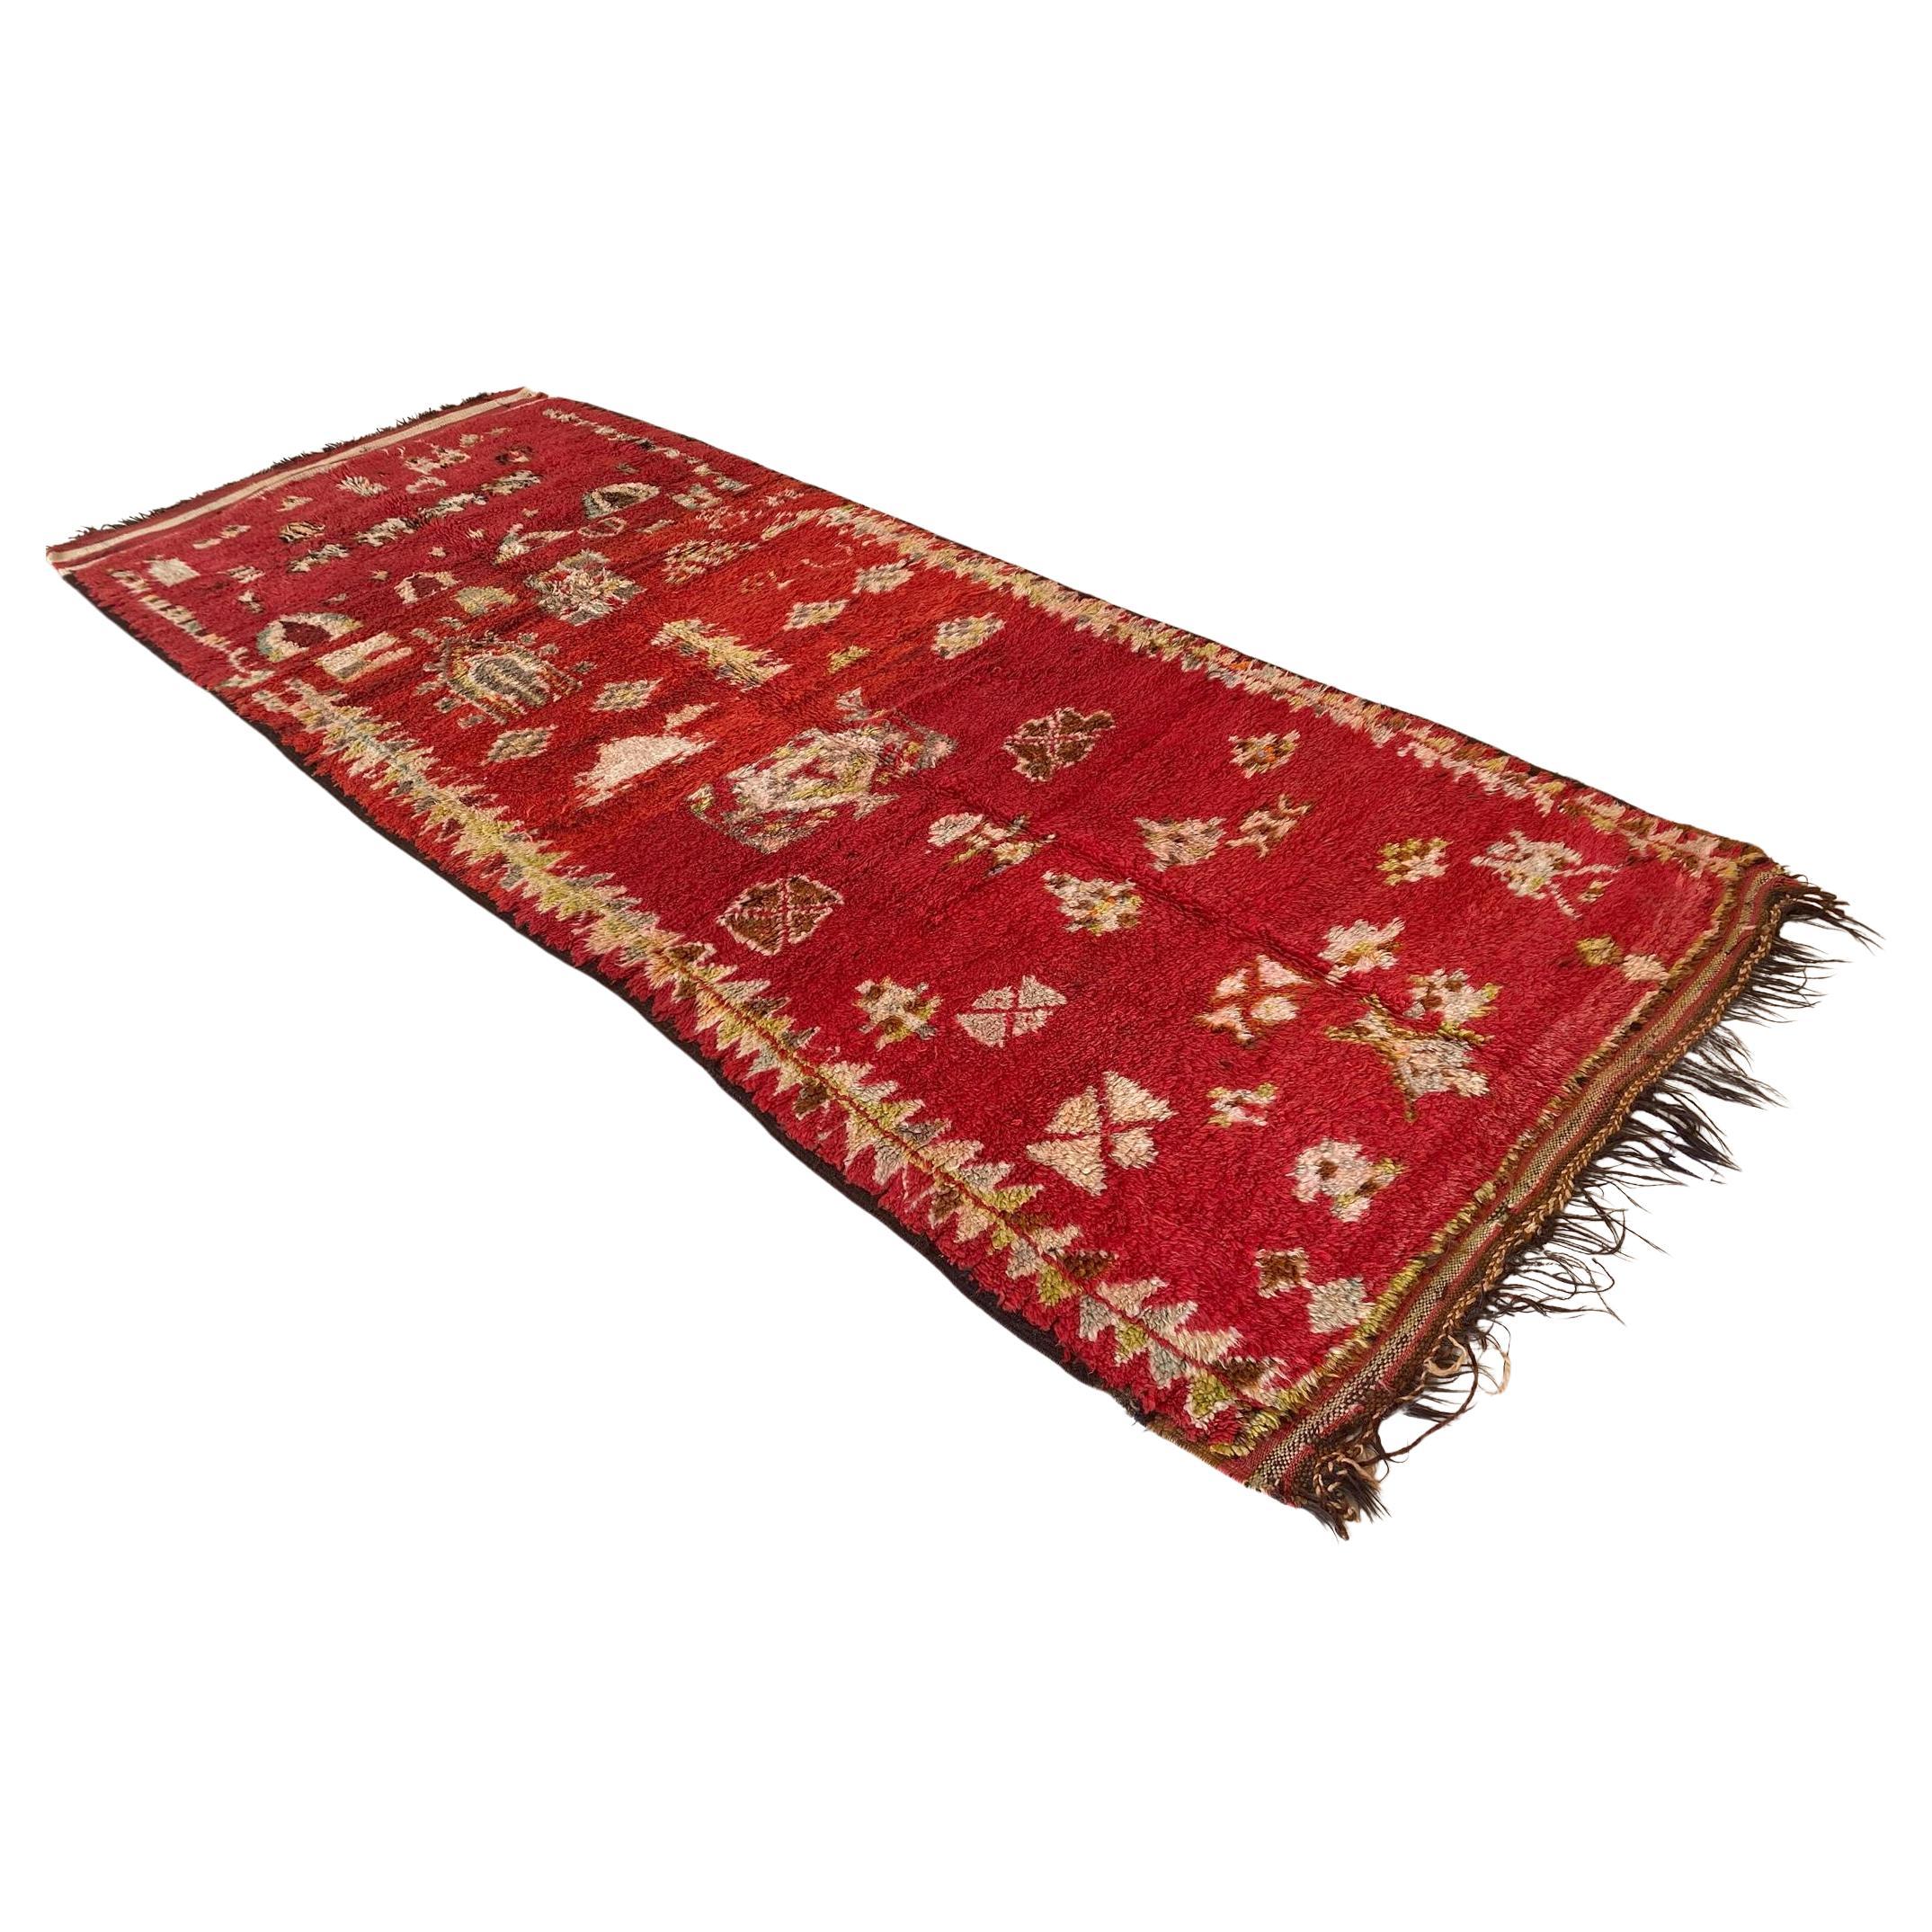 Vintage Moroccan Rehamna rug - Red - 5.1x12.5feet / 156x382cm For Sale